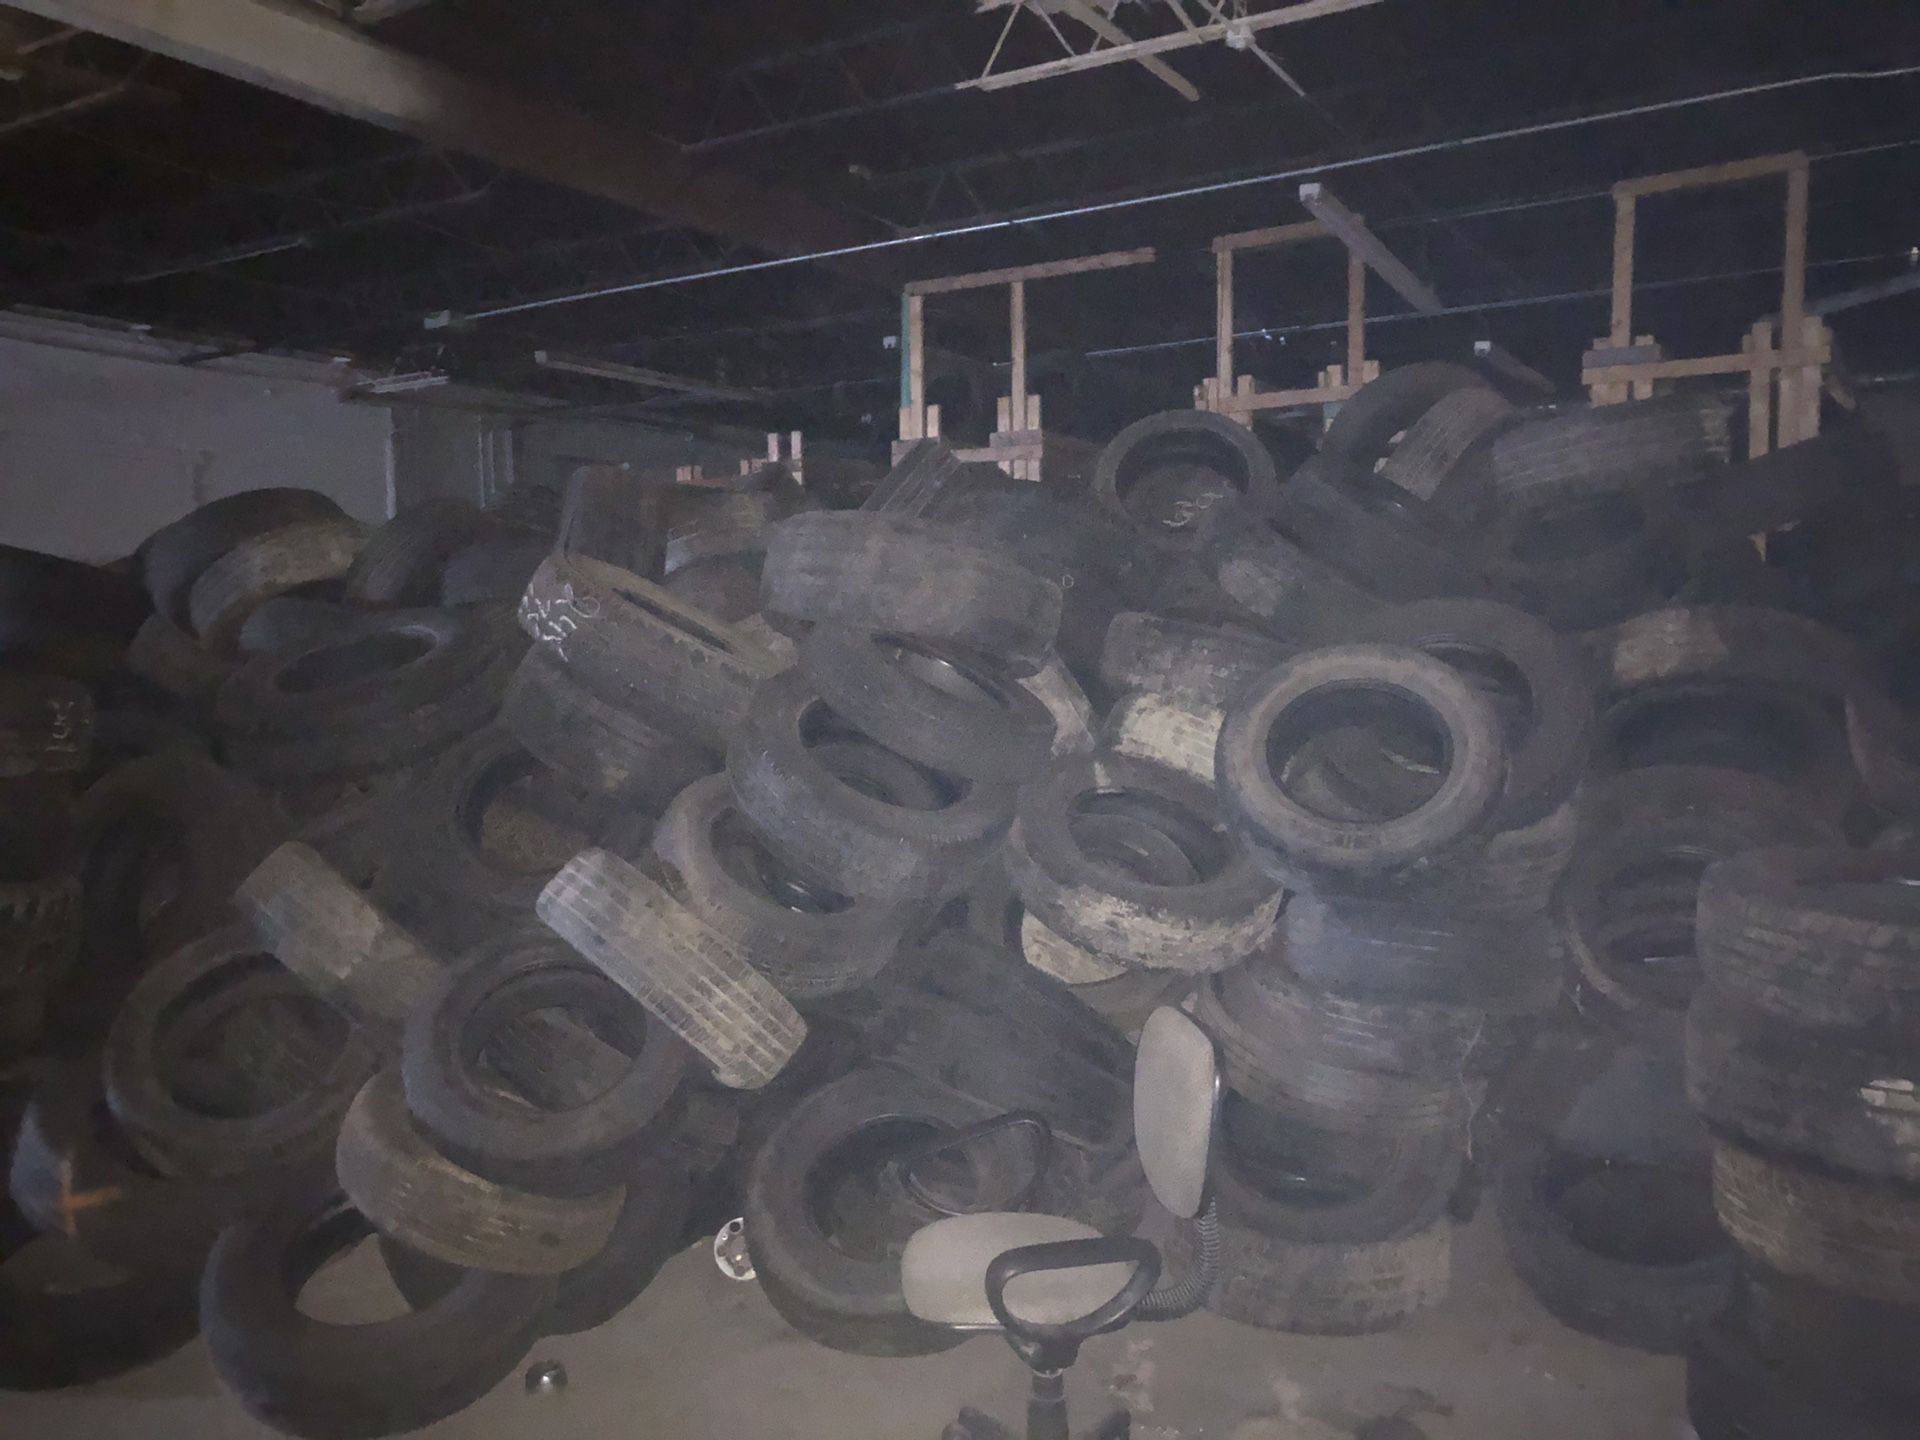 Free tires ( maybe 500 left)